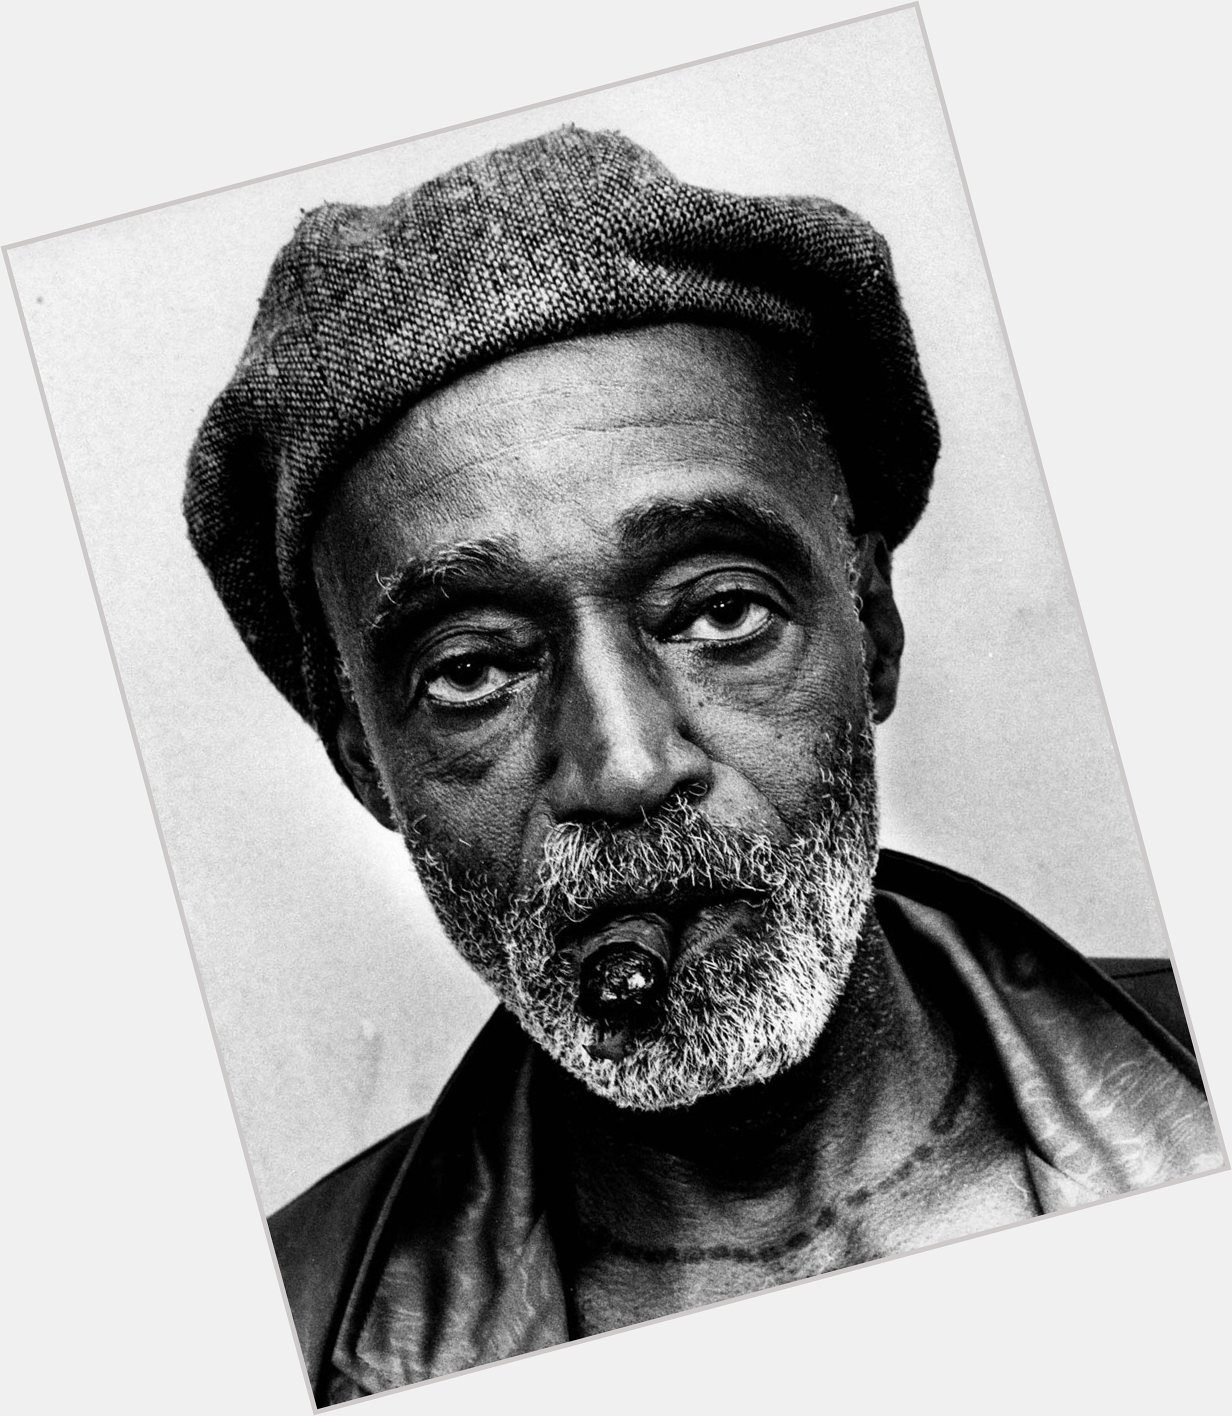 A very happy 85th birthday to one of the greats, Melvin Van Peebles. 